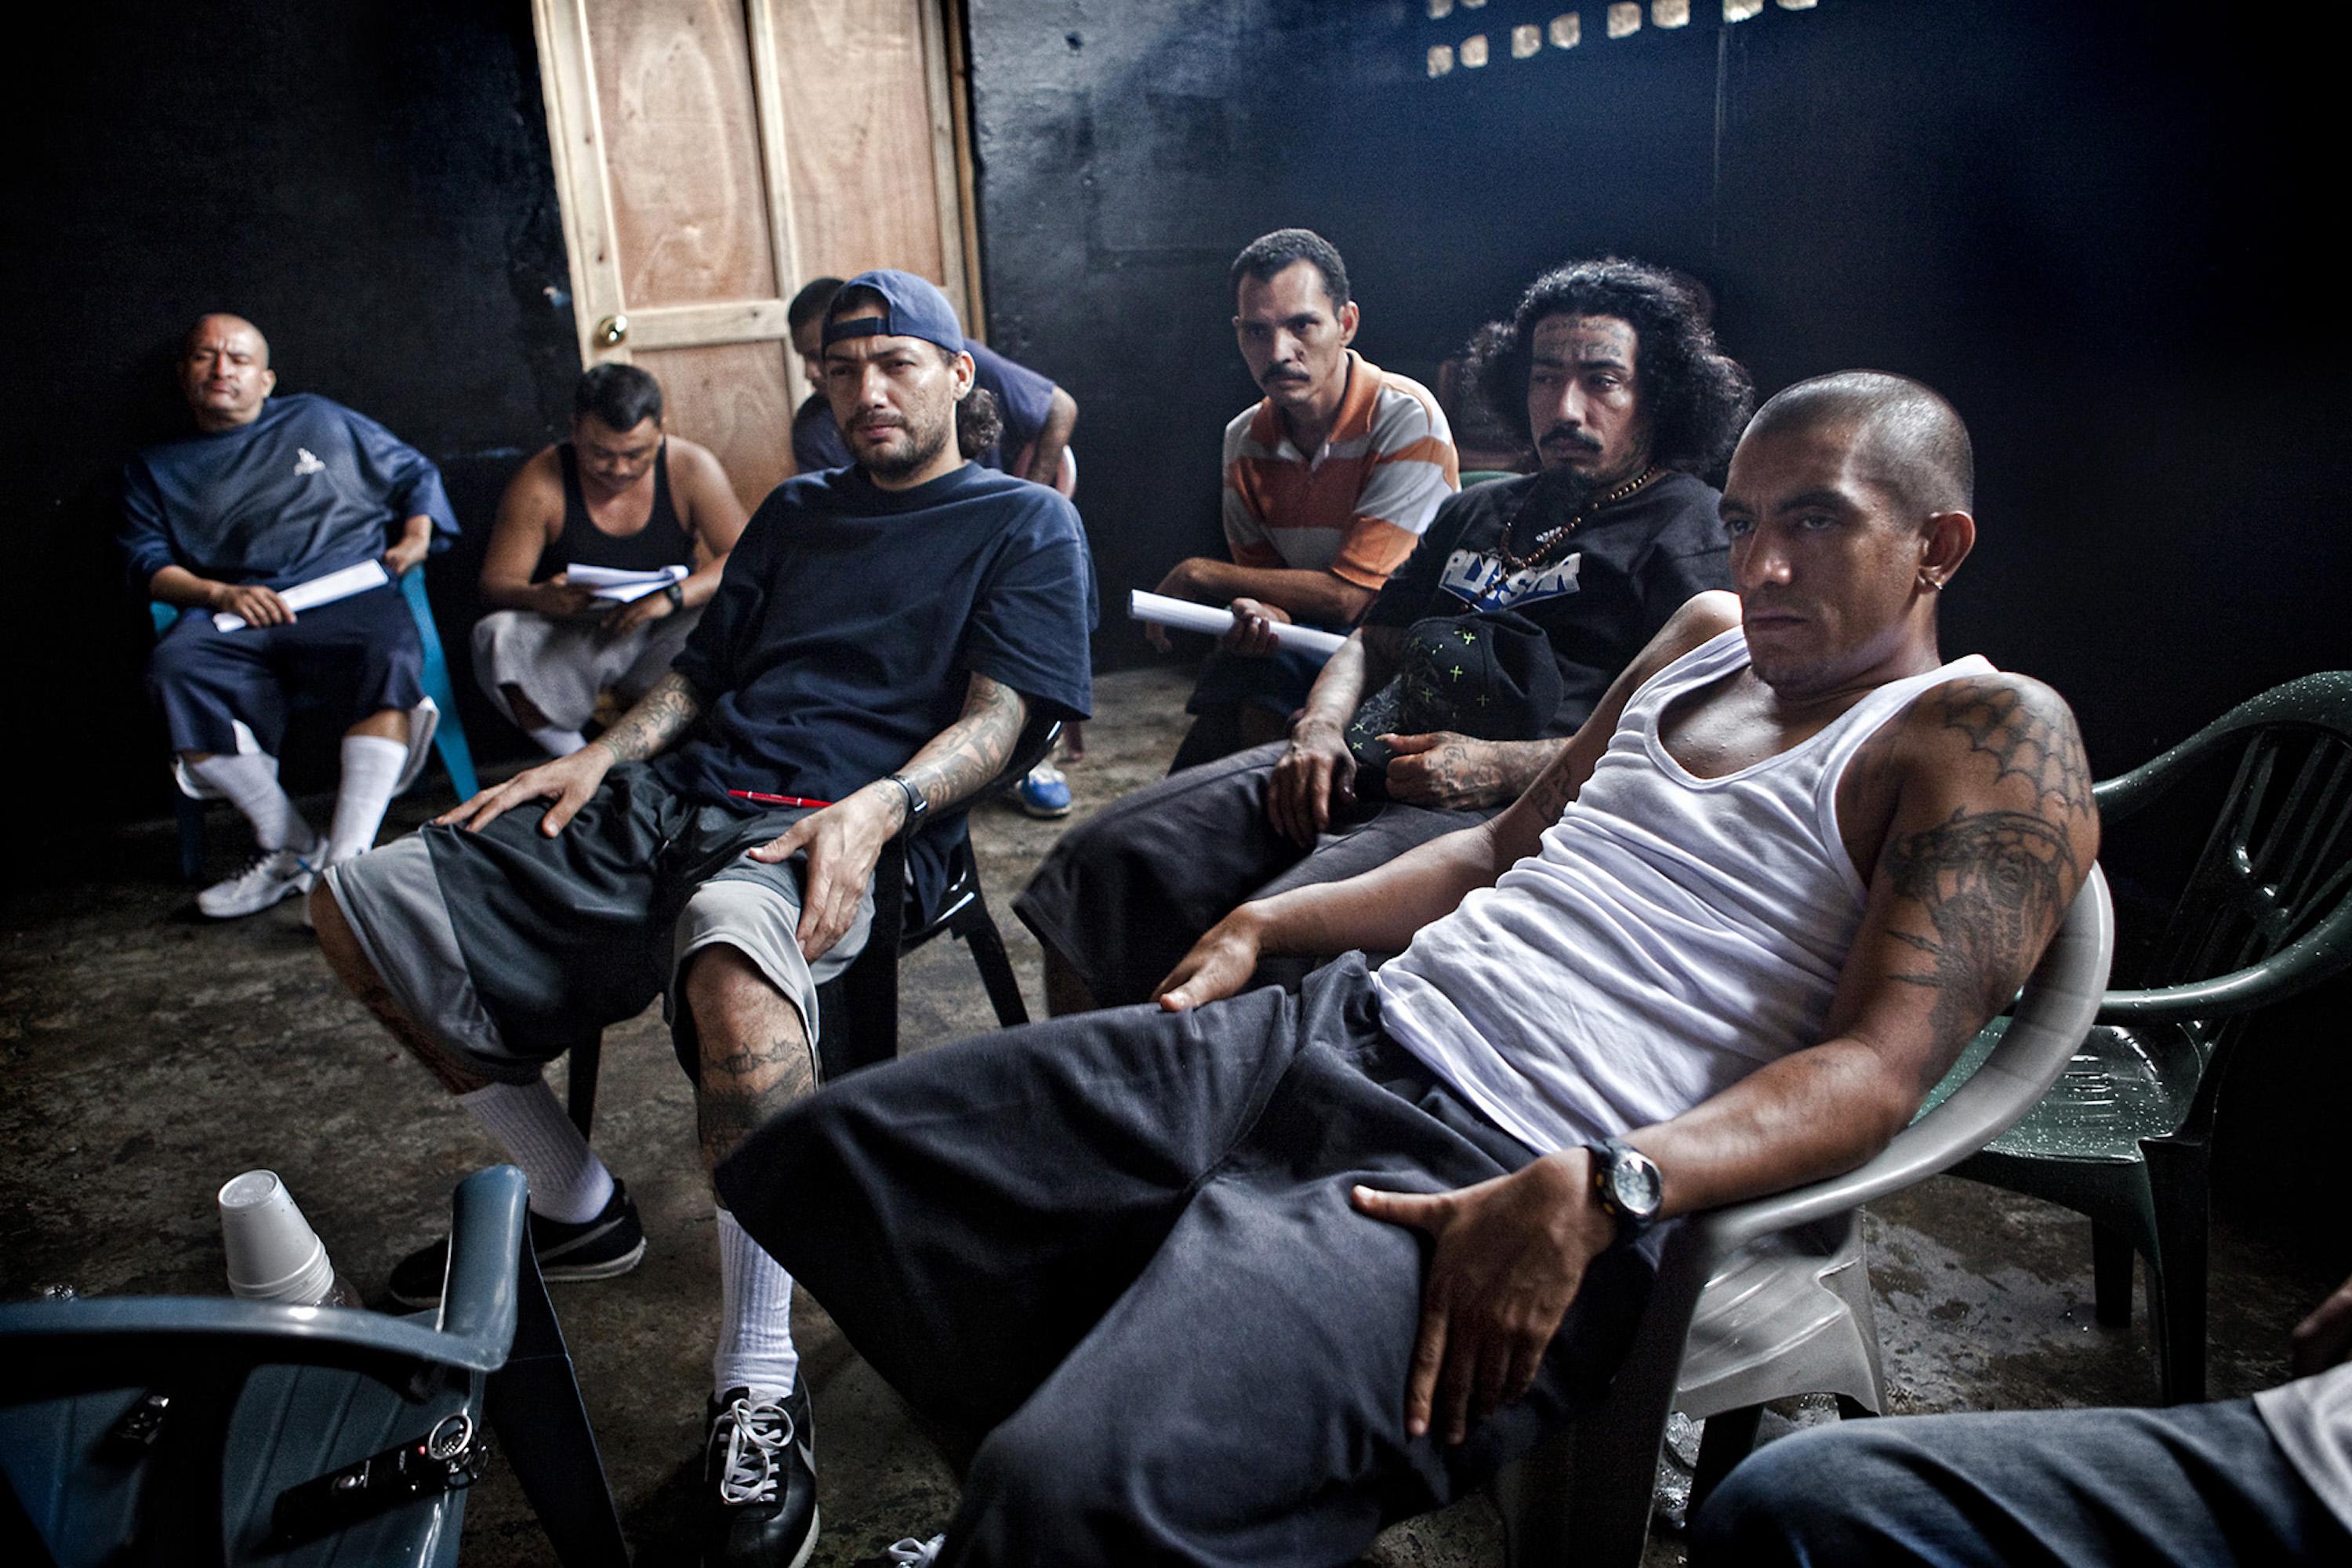 The Ranfla Nacional, or the senior leadership of MS-13, meet at the Ciudad Barrios Penitentiary in the department of San Miguel on Sep. 27, 2012. Photo: Pau Coll - Ruido Photo/El Faro